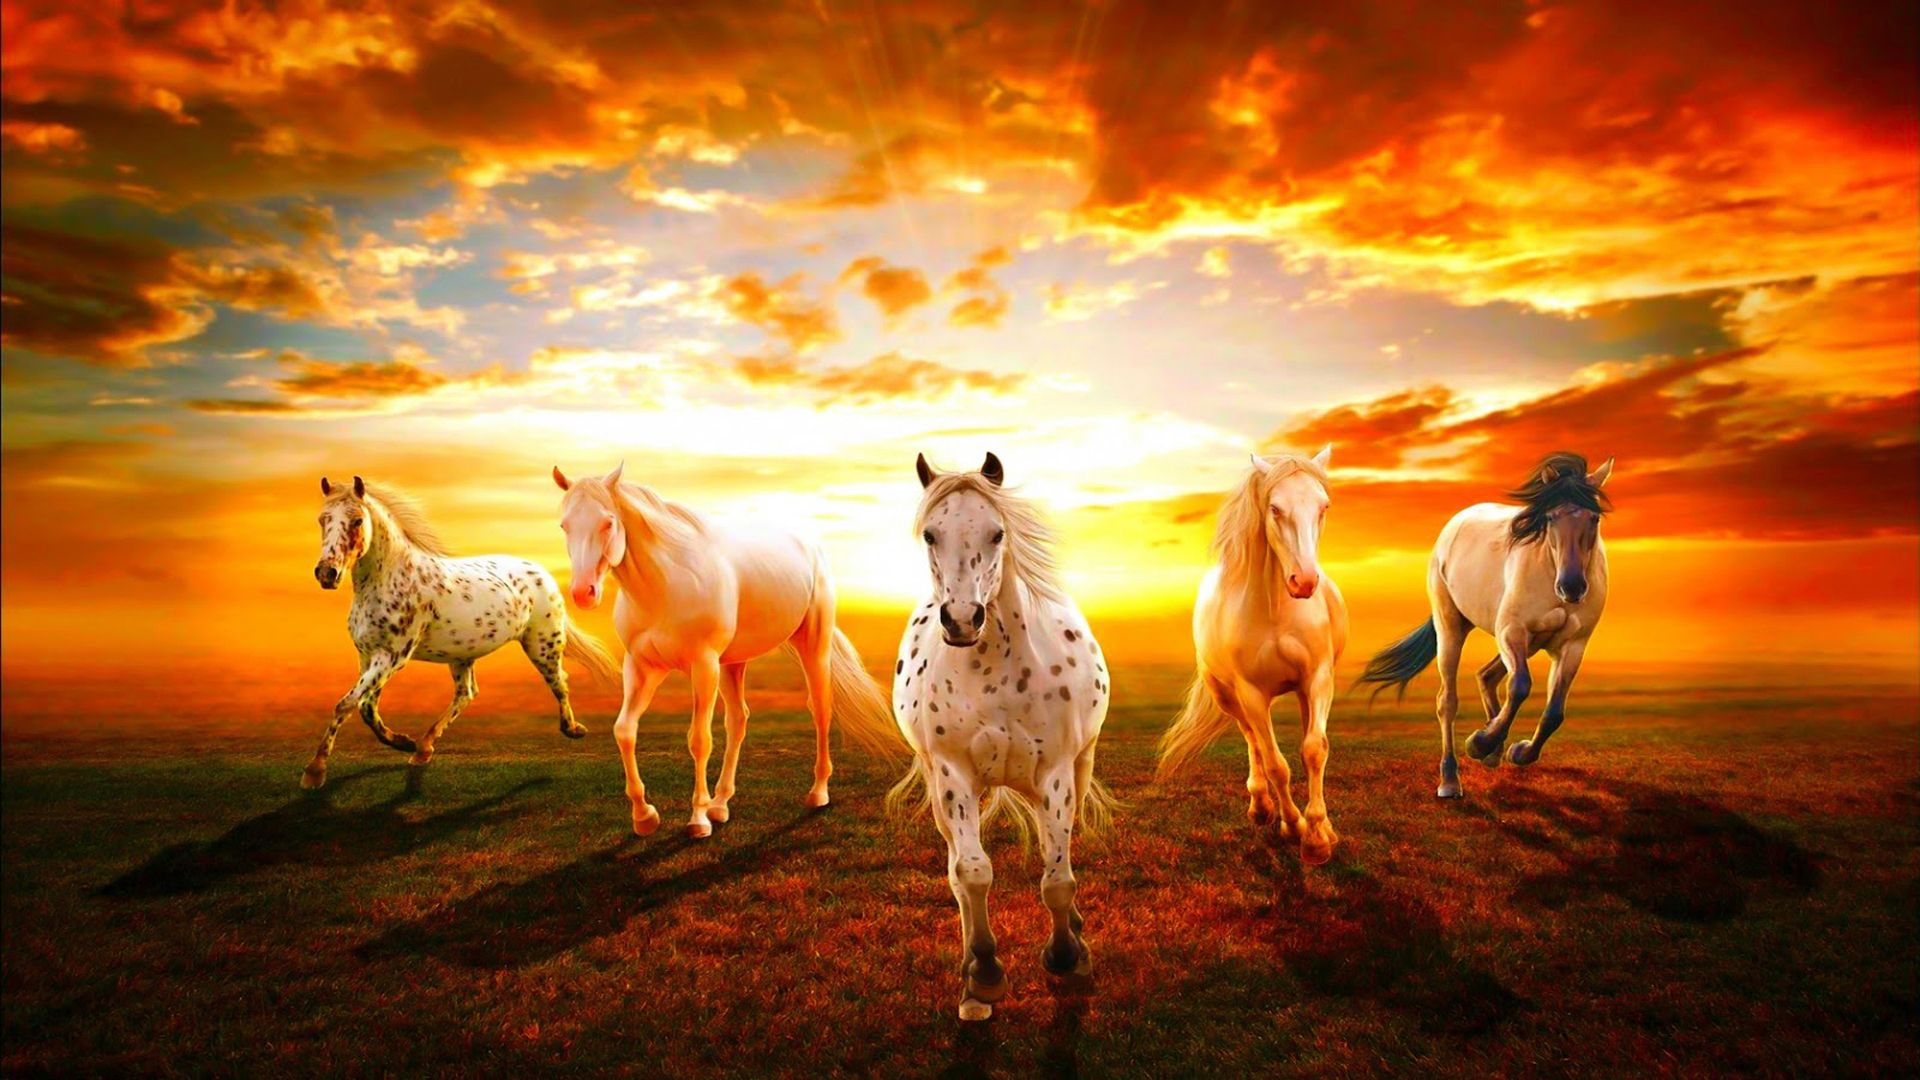 a group of wild horses racing at sunset HD Wallpaper